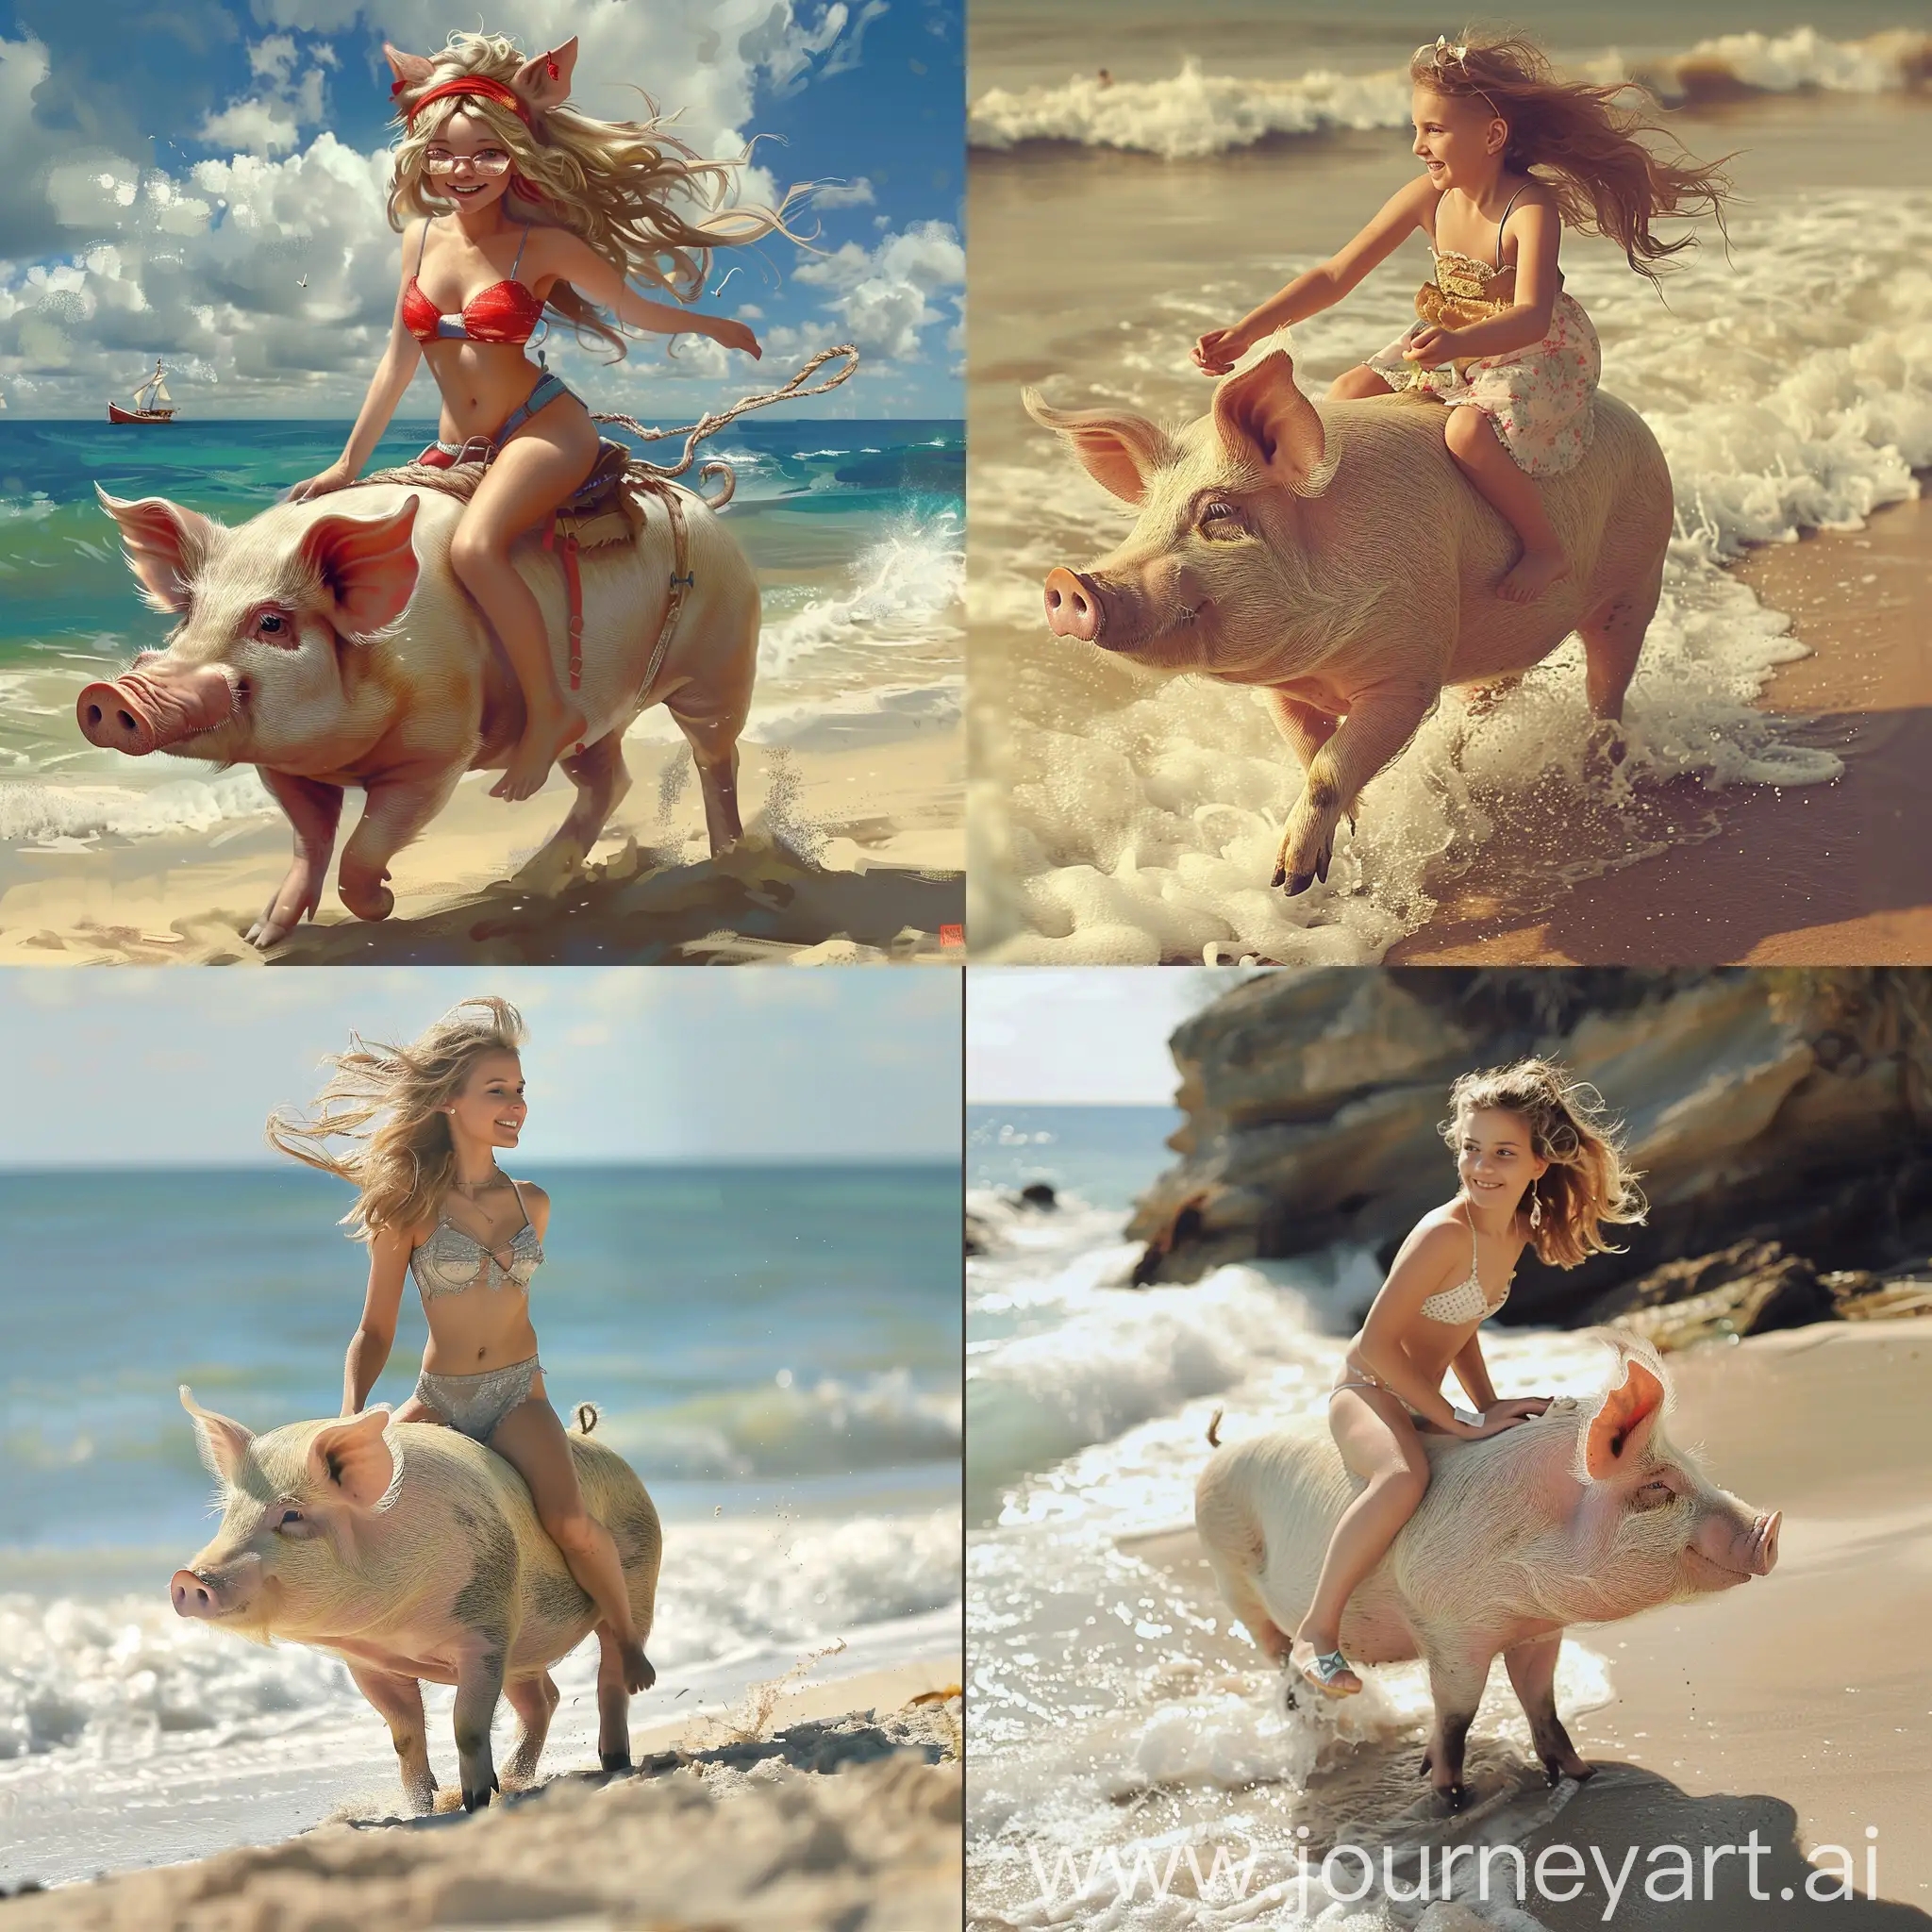 A sexy and beautiful girl is riding a pig by the seaside.